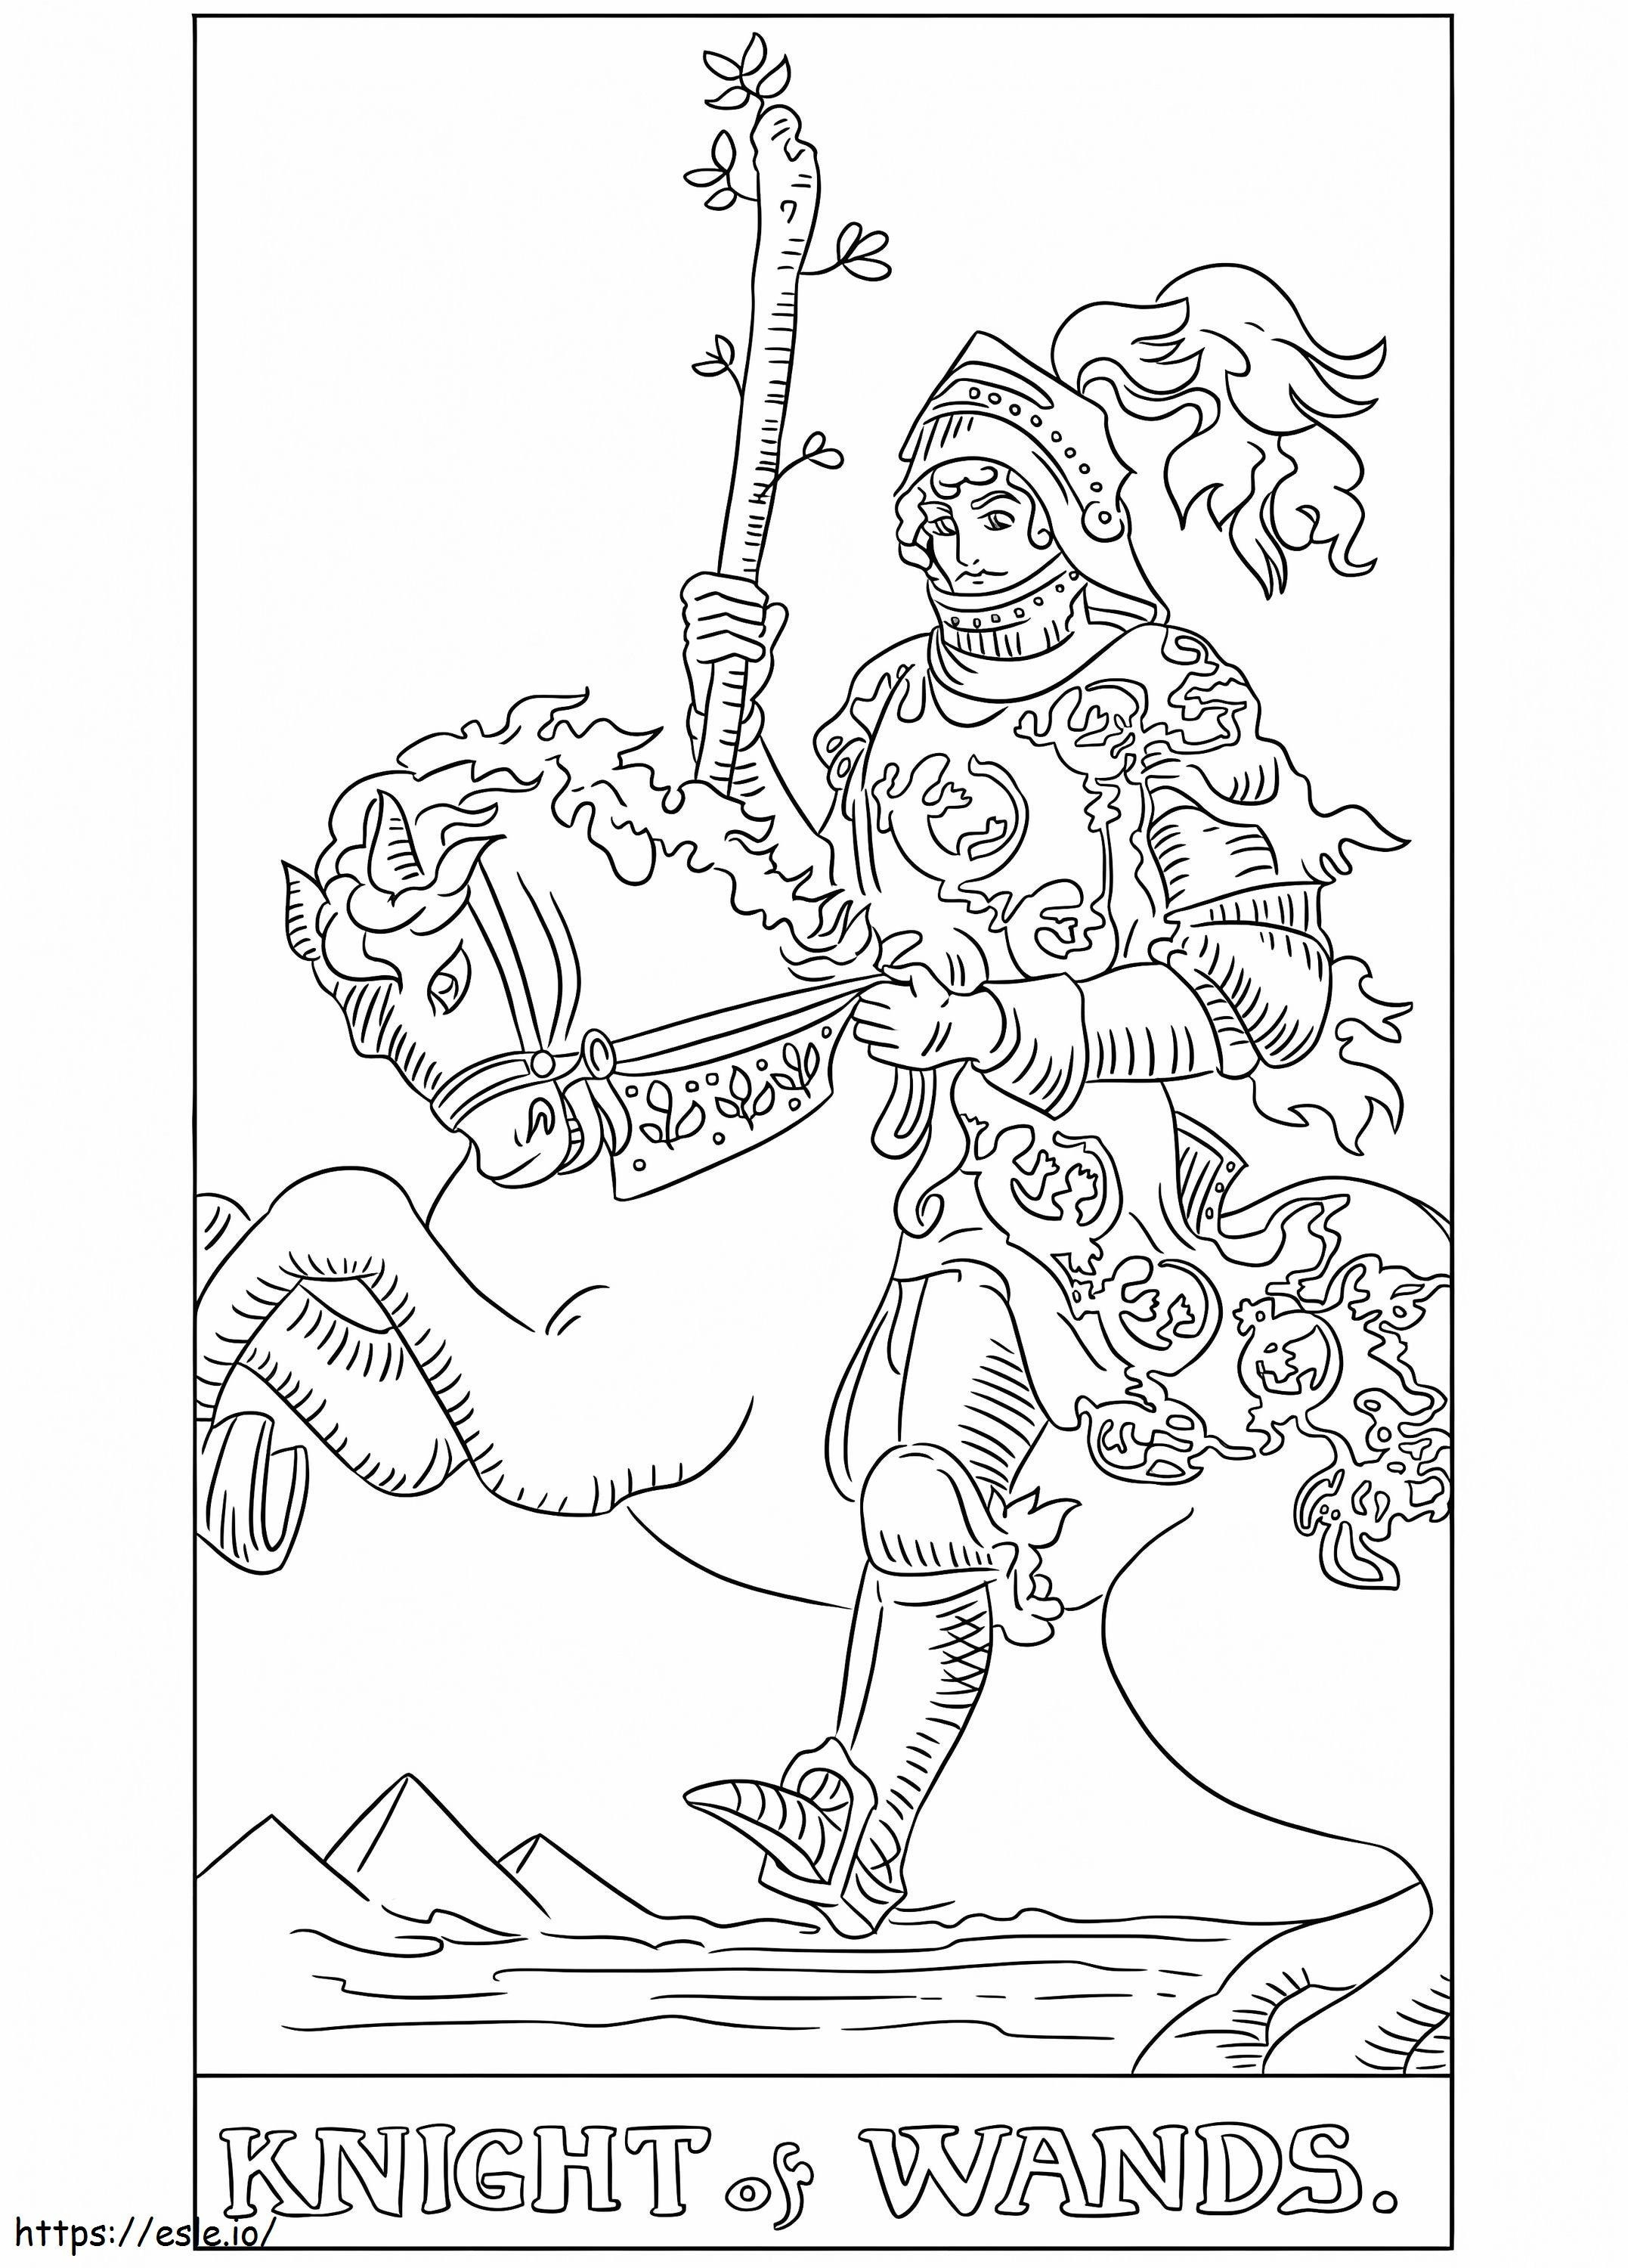 Tarot Knight Of Wands coloring page